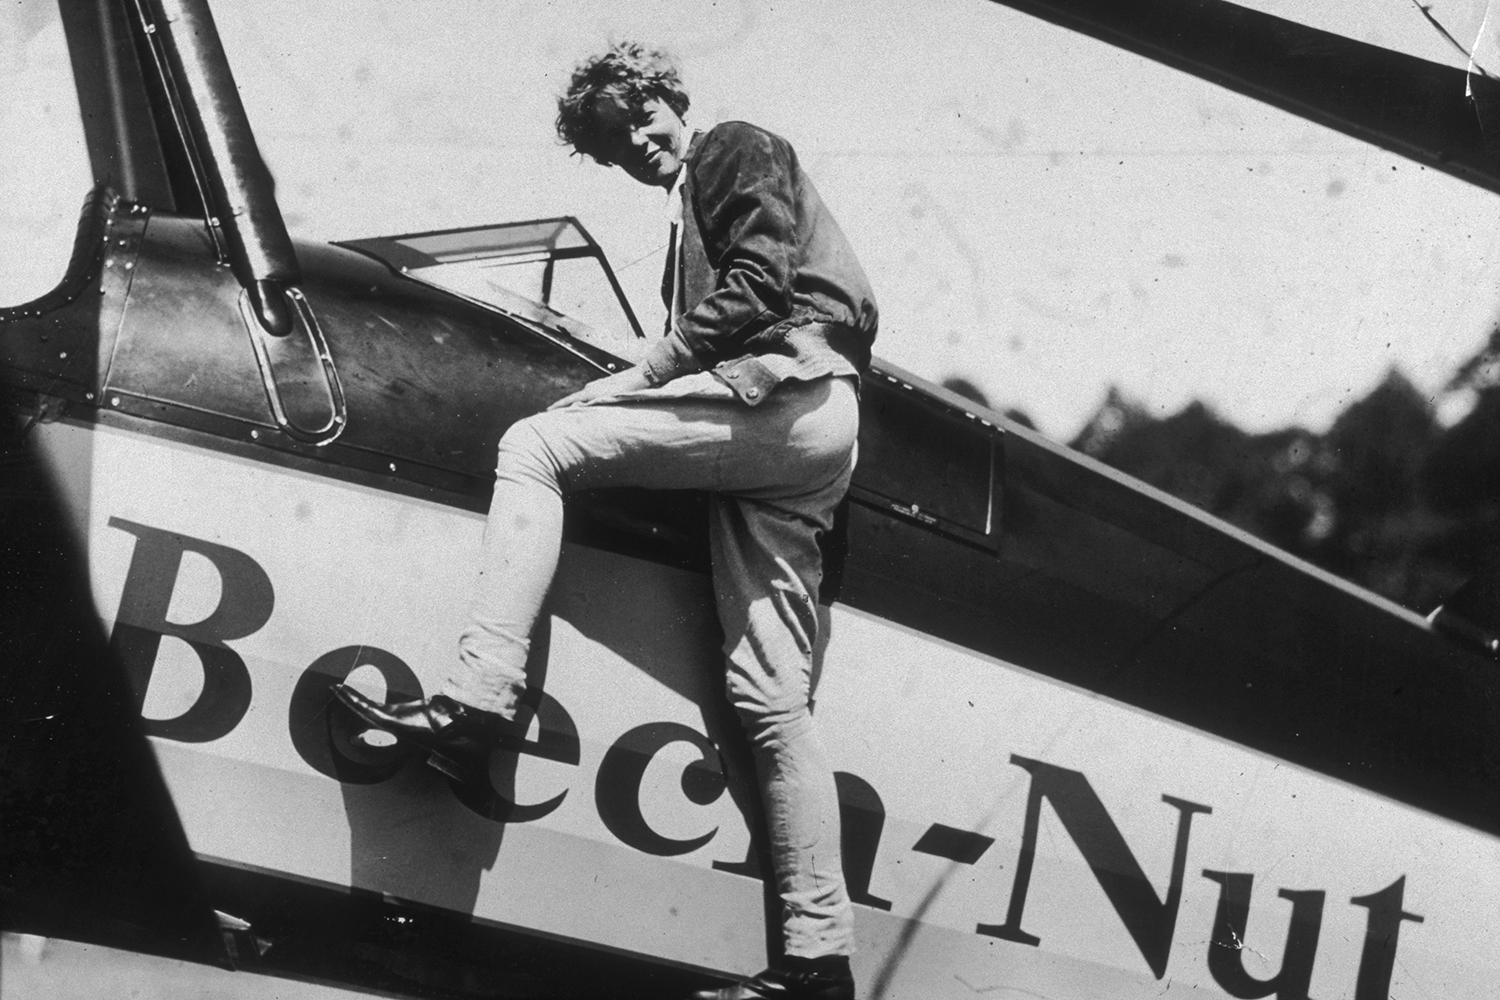 amelia earhart at the side of beech-nut plane